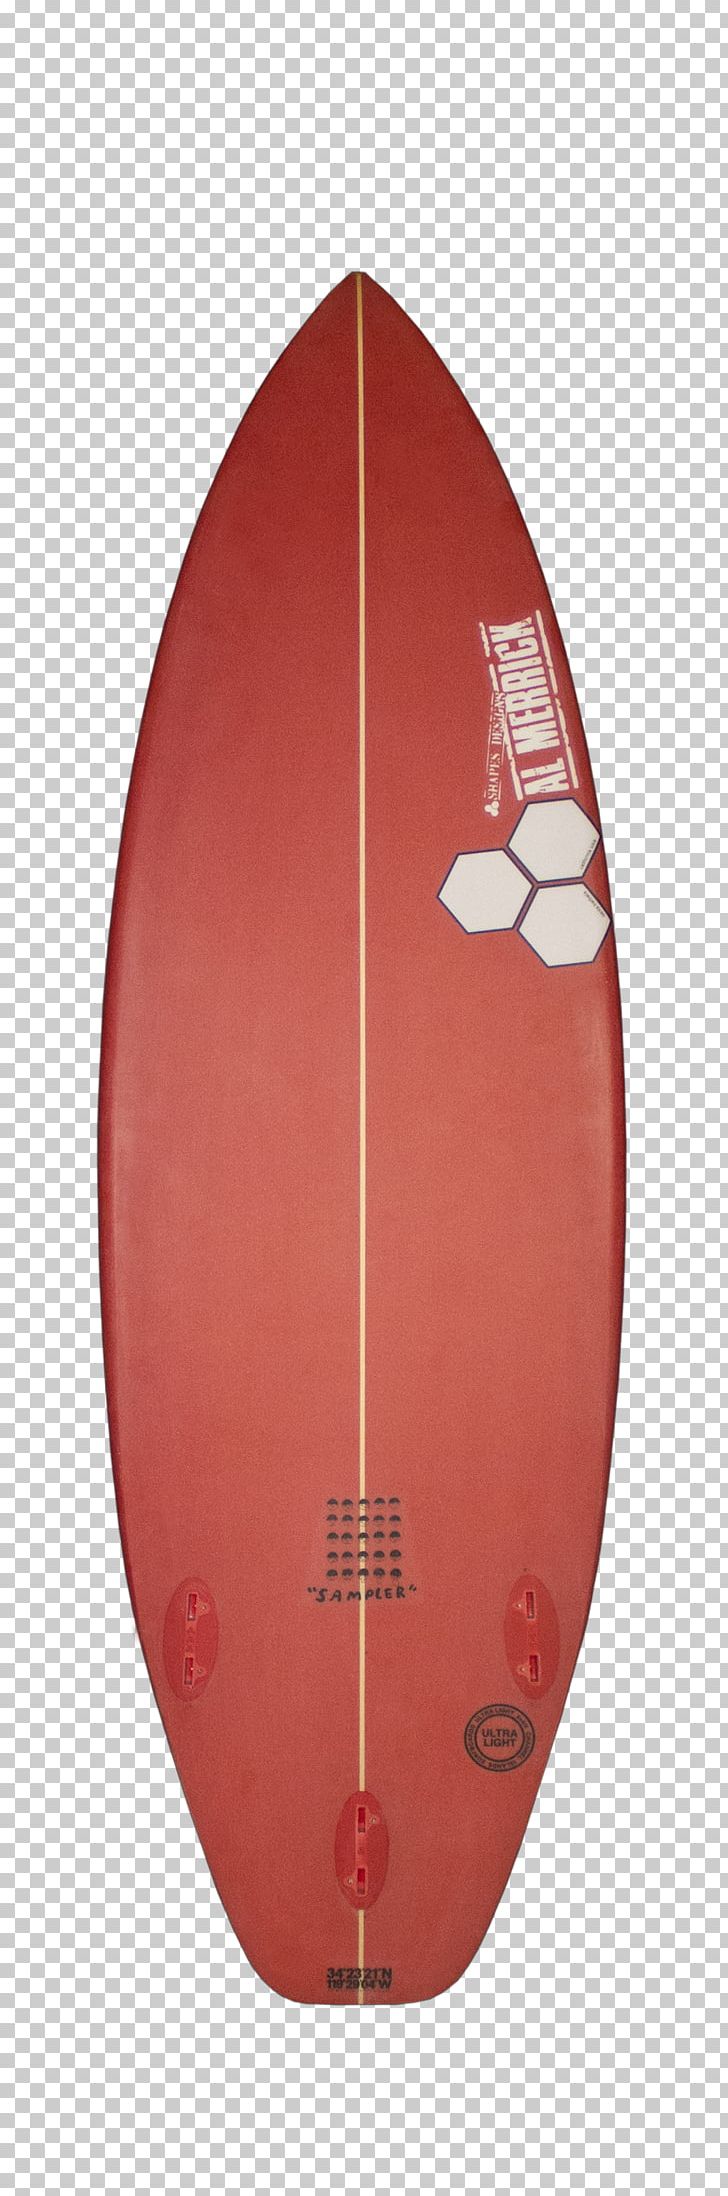 Surfboard PNG, Clipart, Art, Surfboard, Surfboards, Surfing Equipment And Supplies Free PNG Download